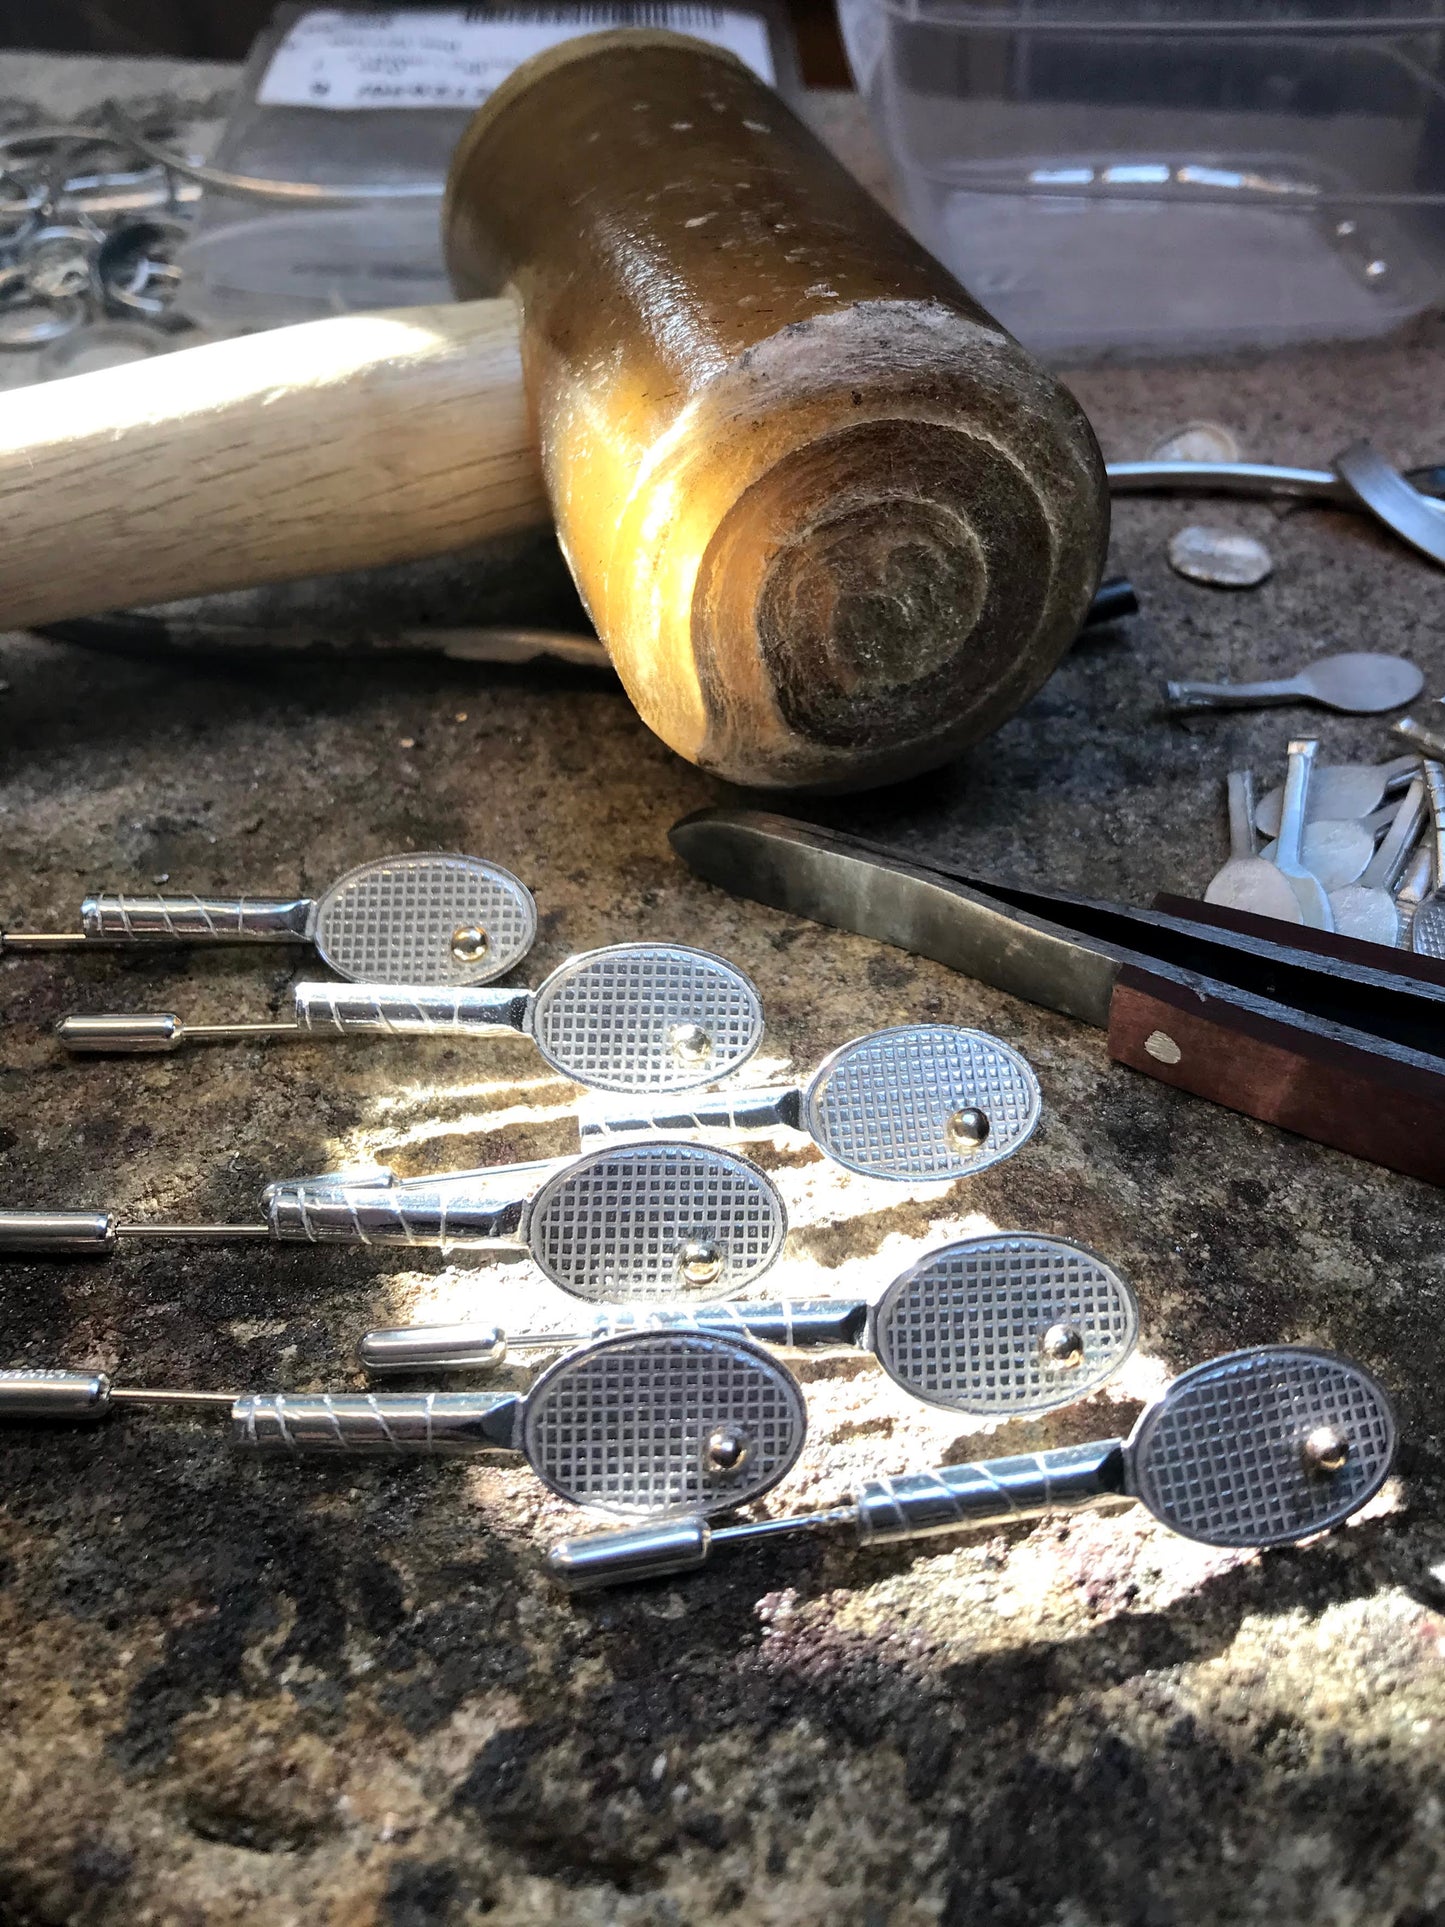 seven sterling silver tennis racket shaped broach/stick pins handmade with 9ct gold ball. Pictured with traditional rawhide mallet